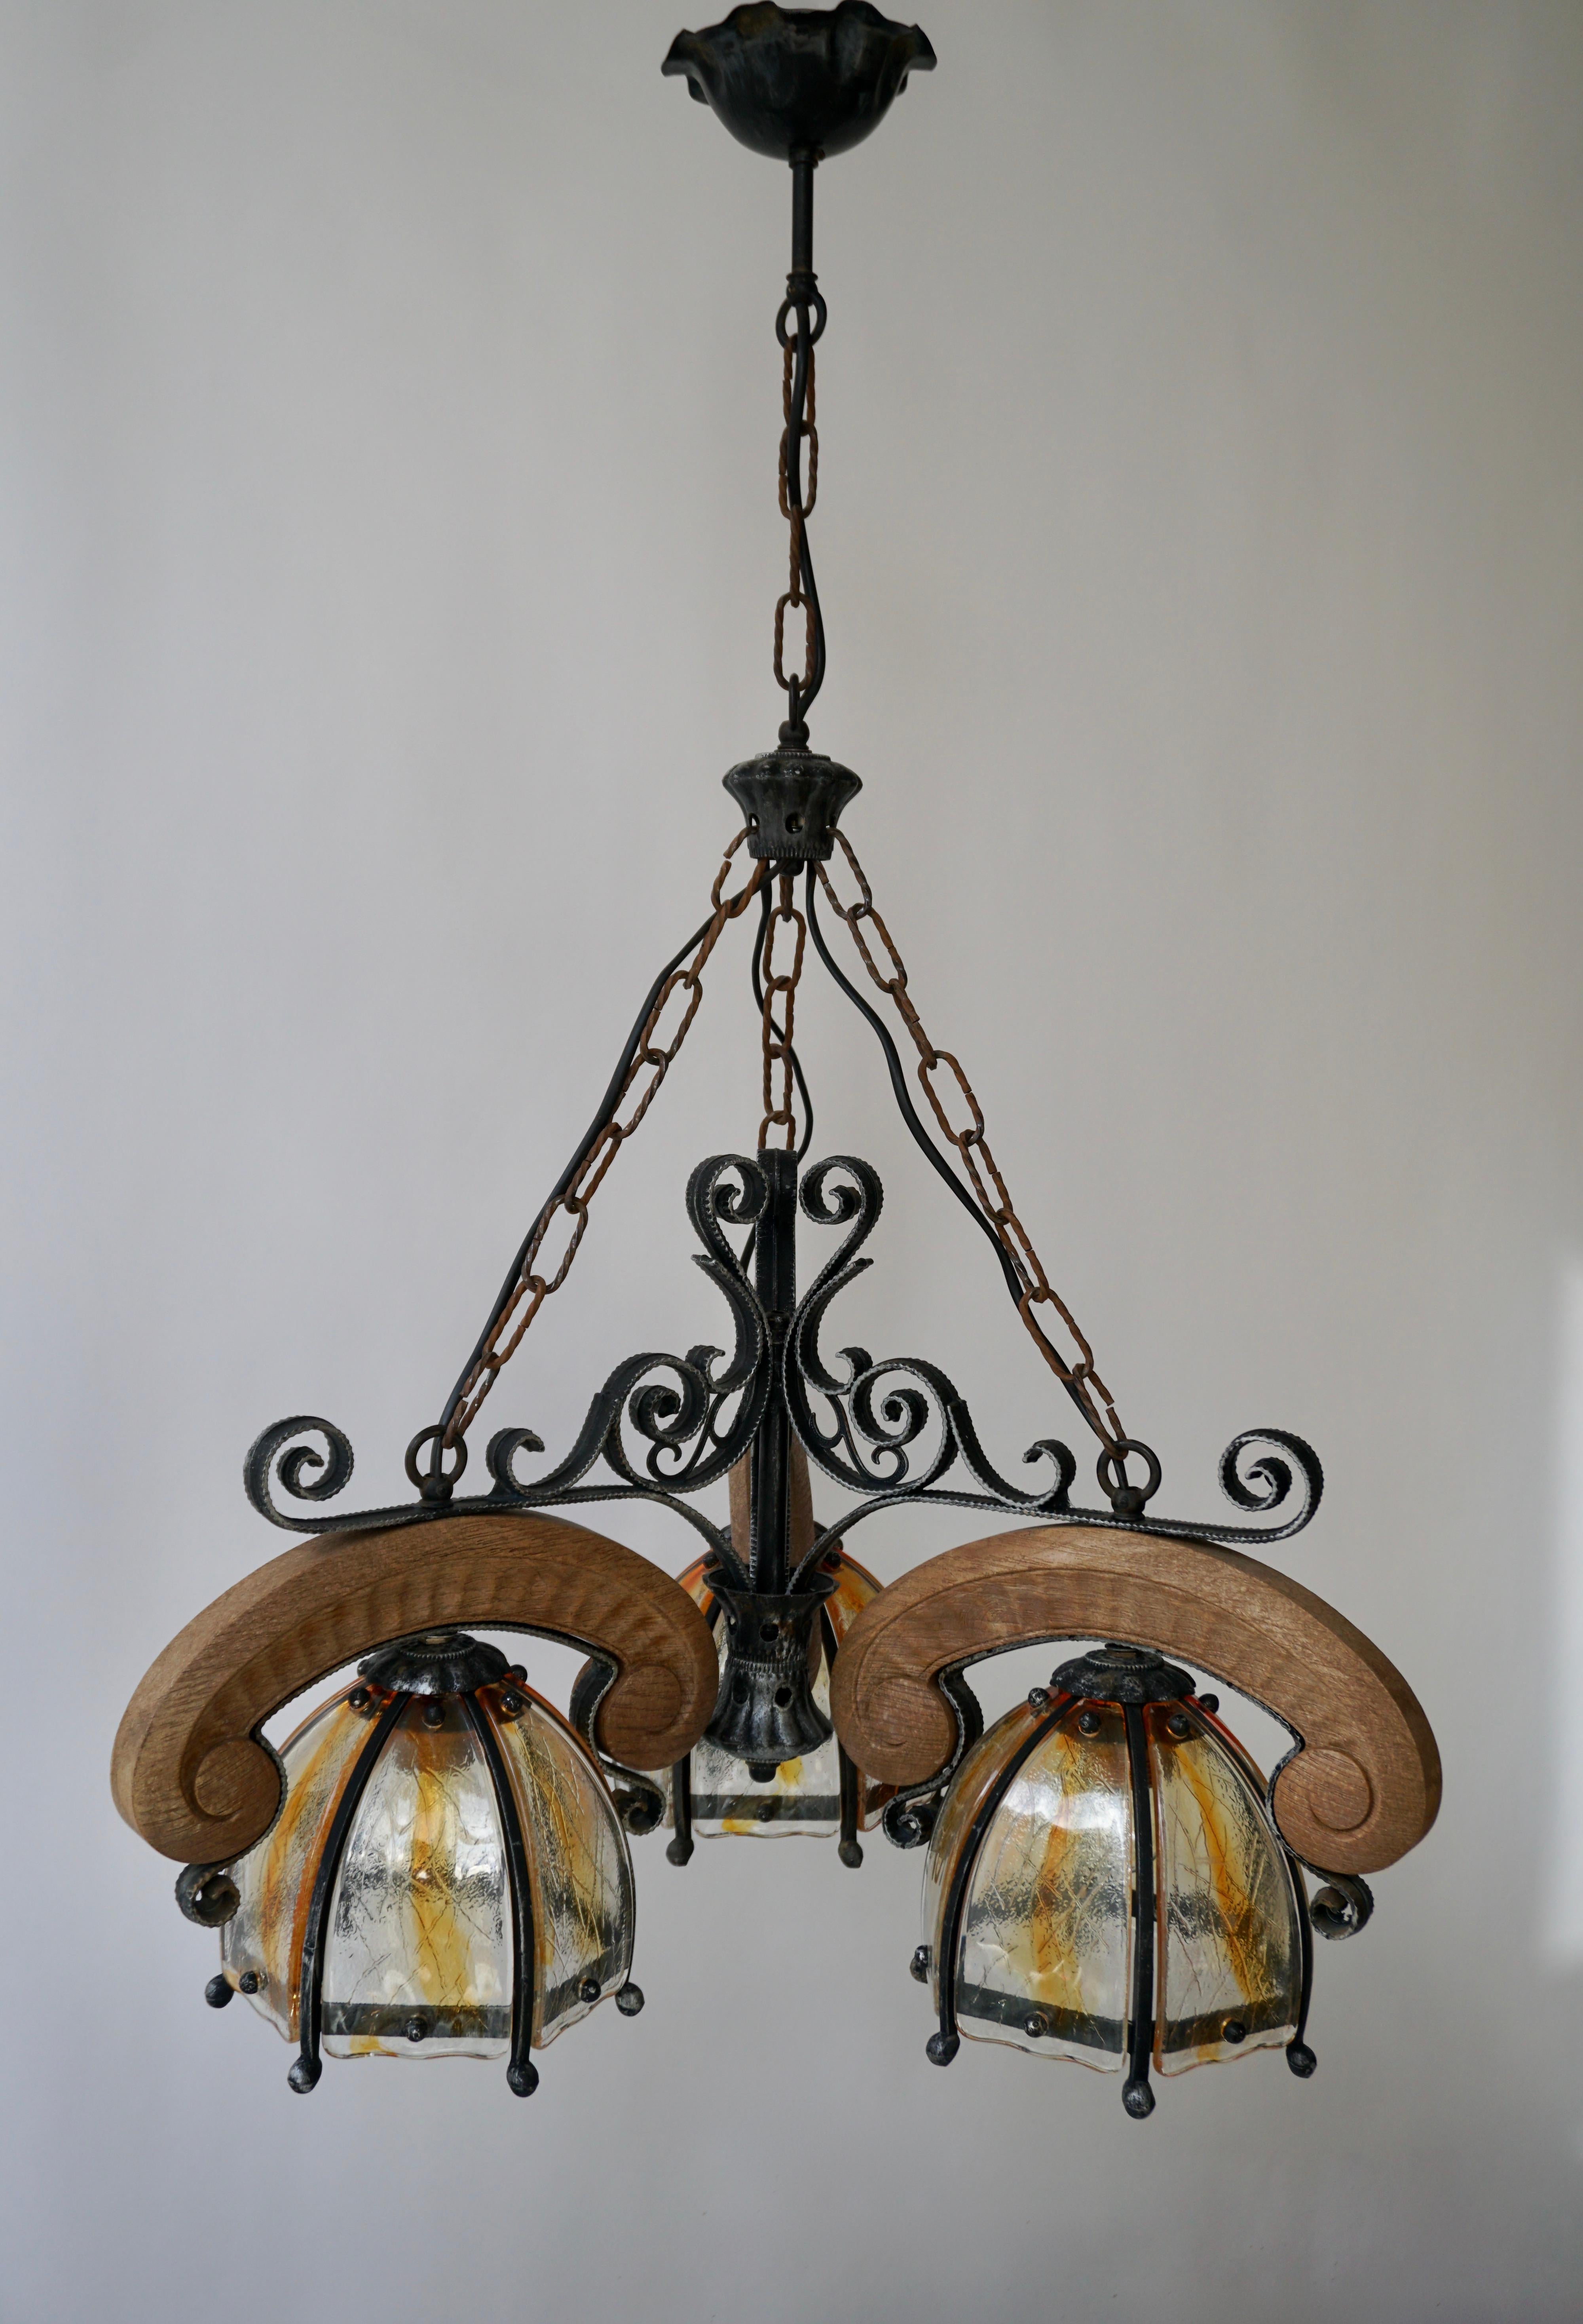 A vintage French three-light rustic wrought iron and wood three arms chandelier with beautiful glass shades.
The light requires three single E27 screw fit lightbulbs (60 Watt max.)

Measures: Diameter 55 cm.
Height fixture 61 cm.
The total